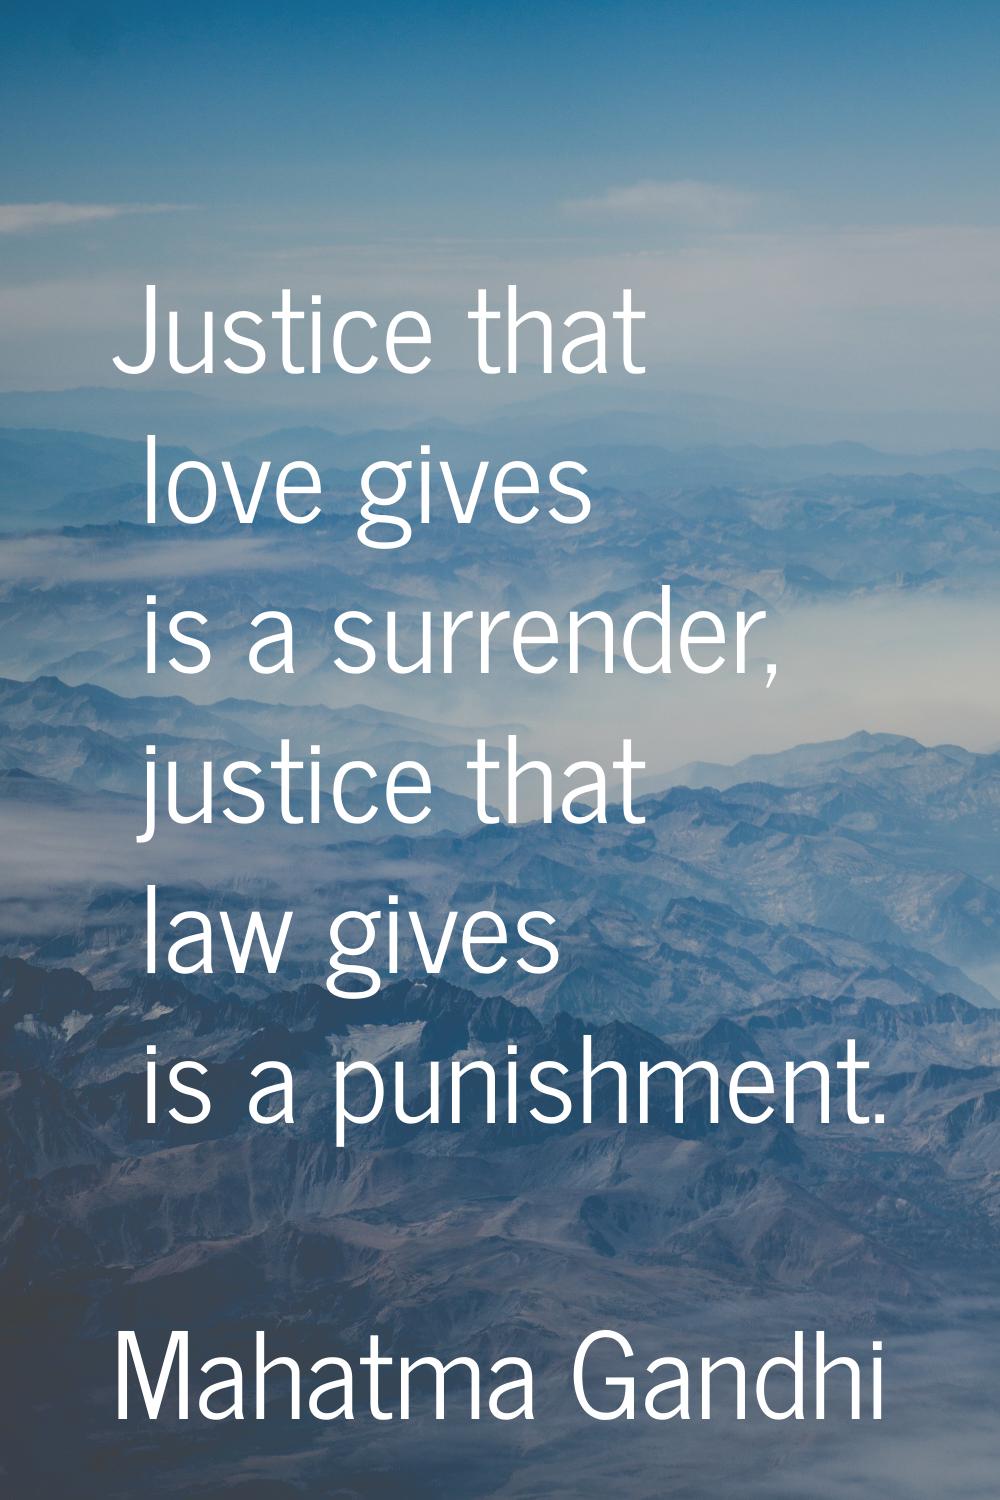 Justice that love gives is a surrender, justice that law gives is a punishment.